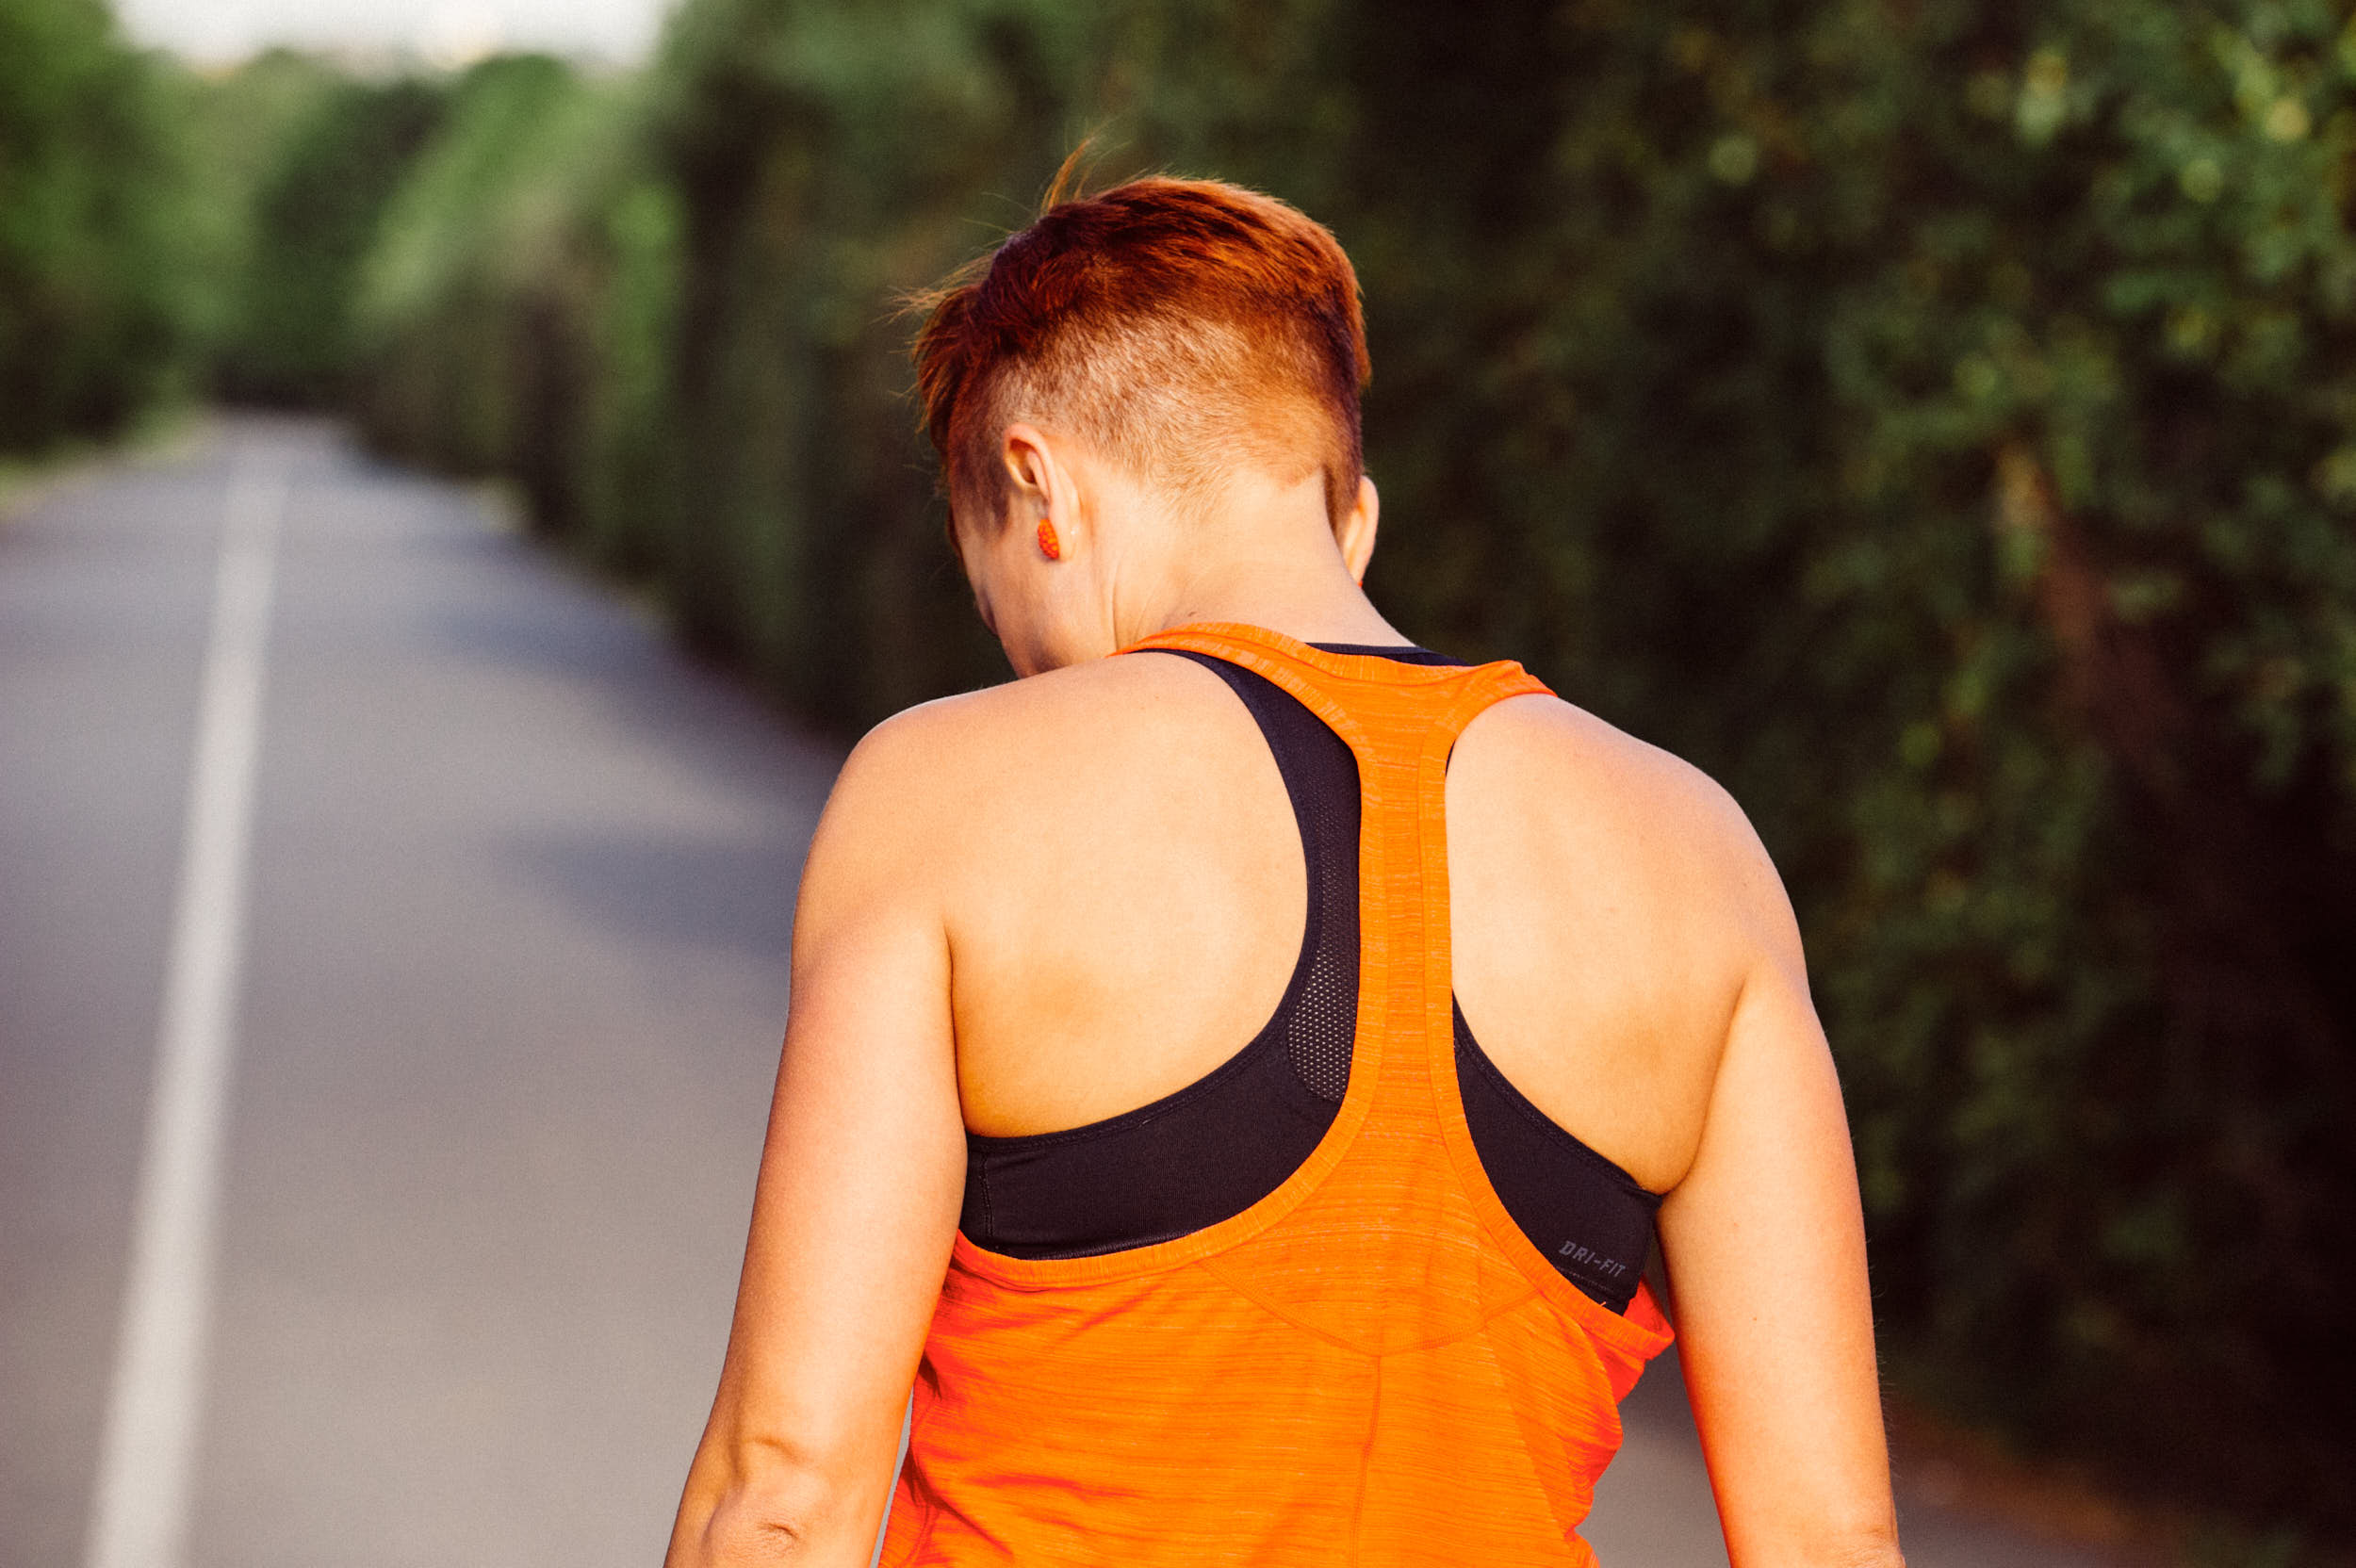 A girl with orange hair and tank top is preparing herself for a run.